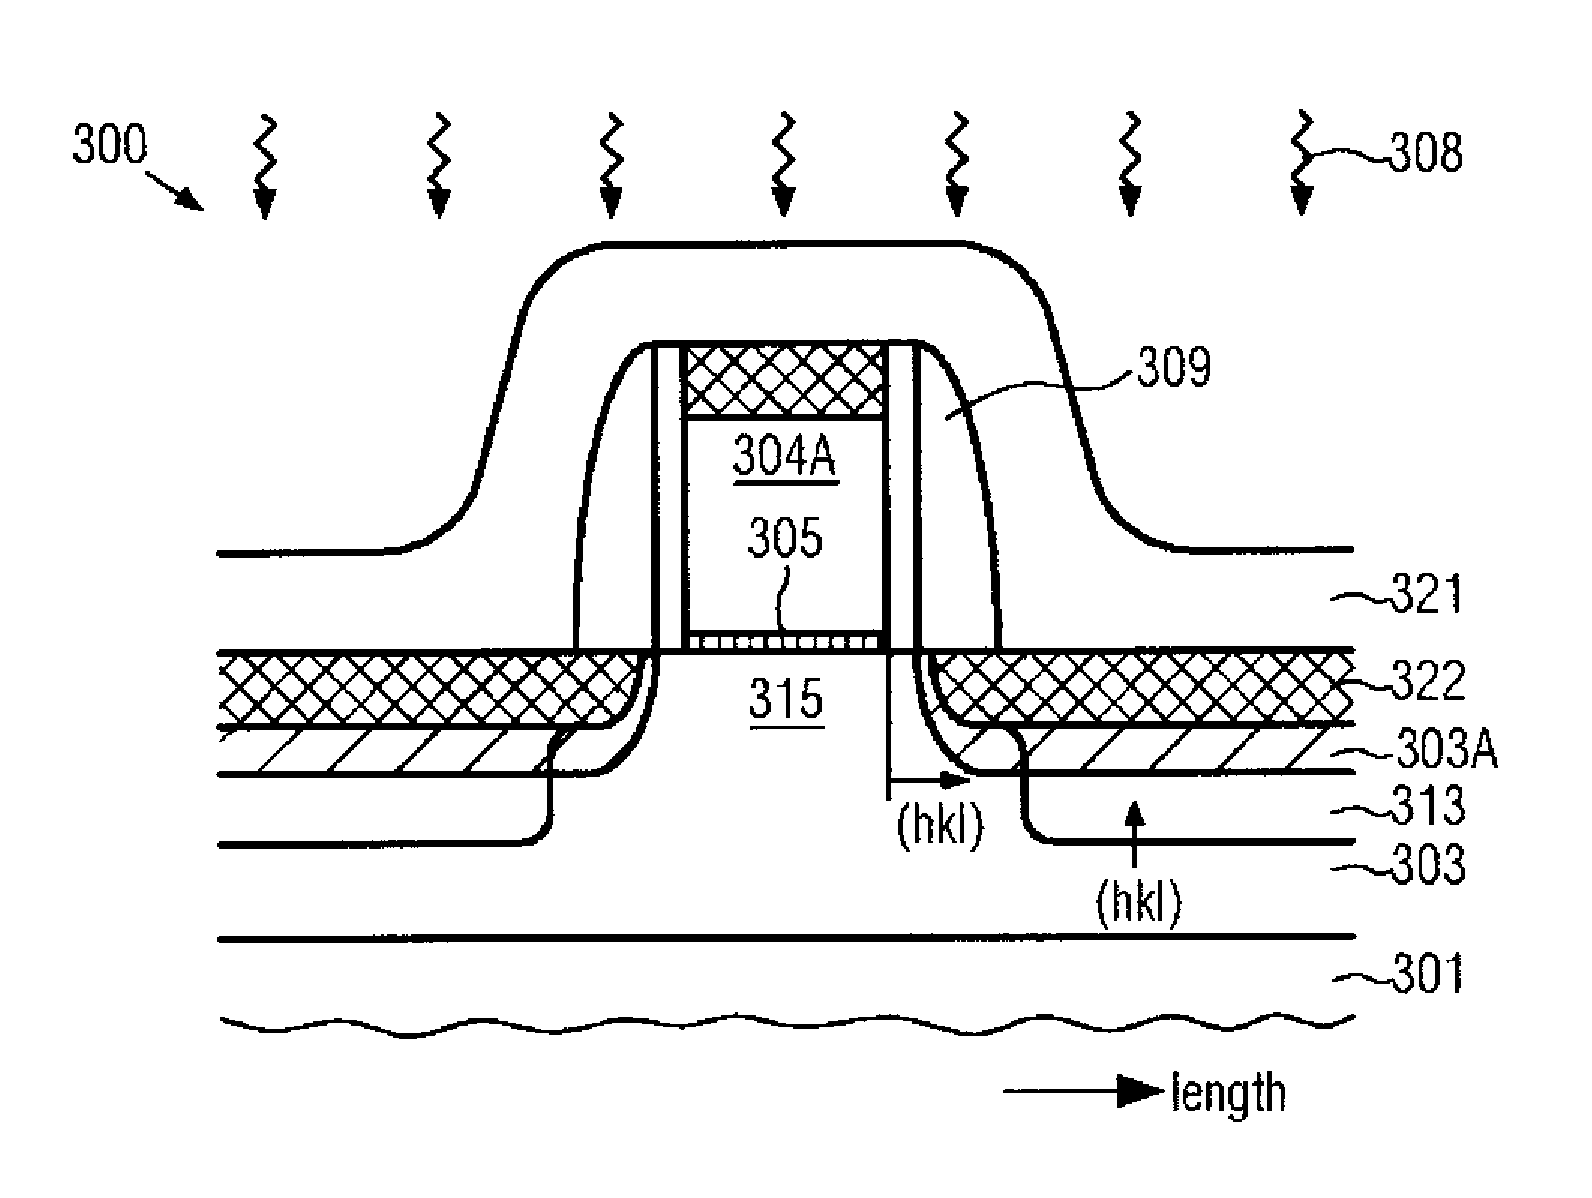 Method for reducing crystal defects in transistors with re-grown shallow junctions by appropriately selecting crystalline orientations